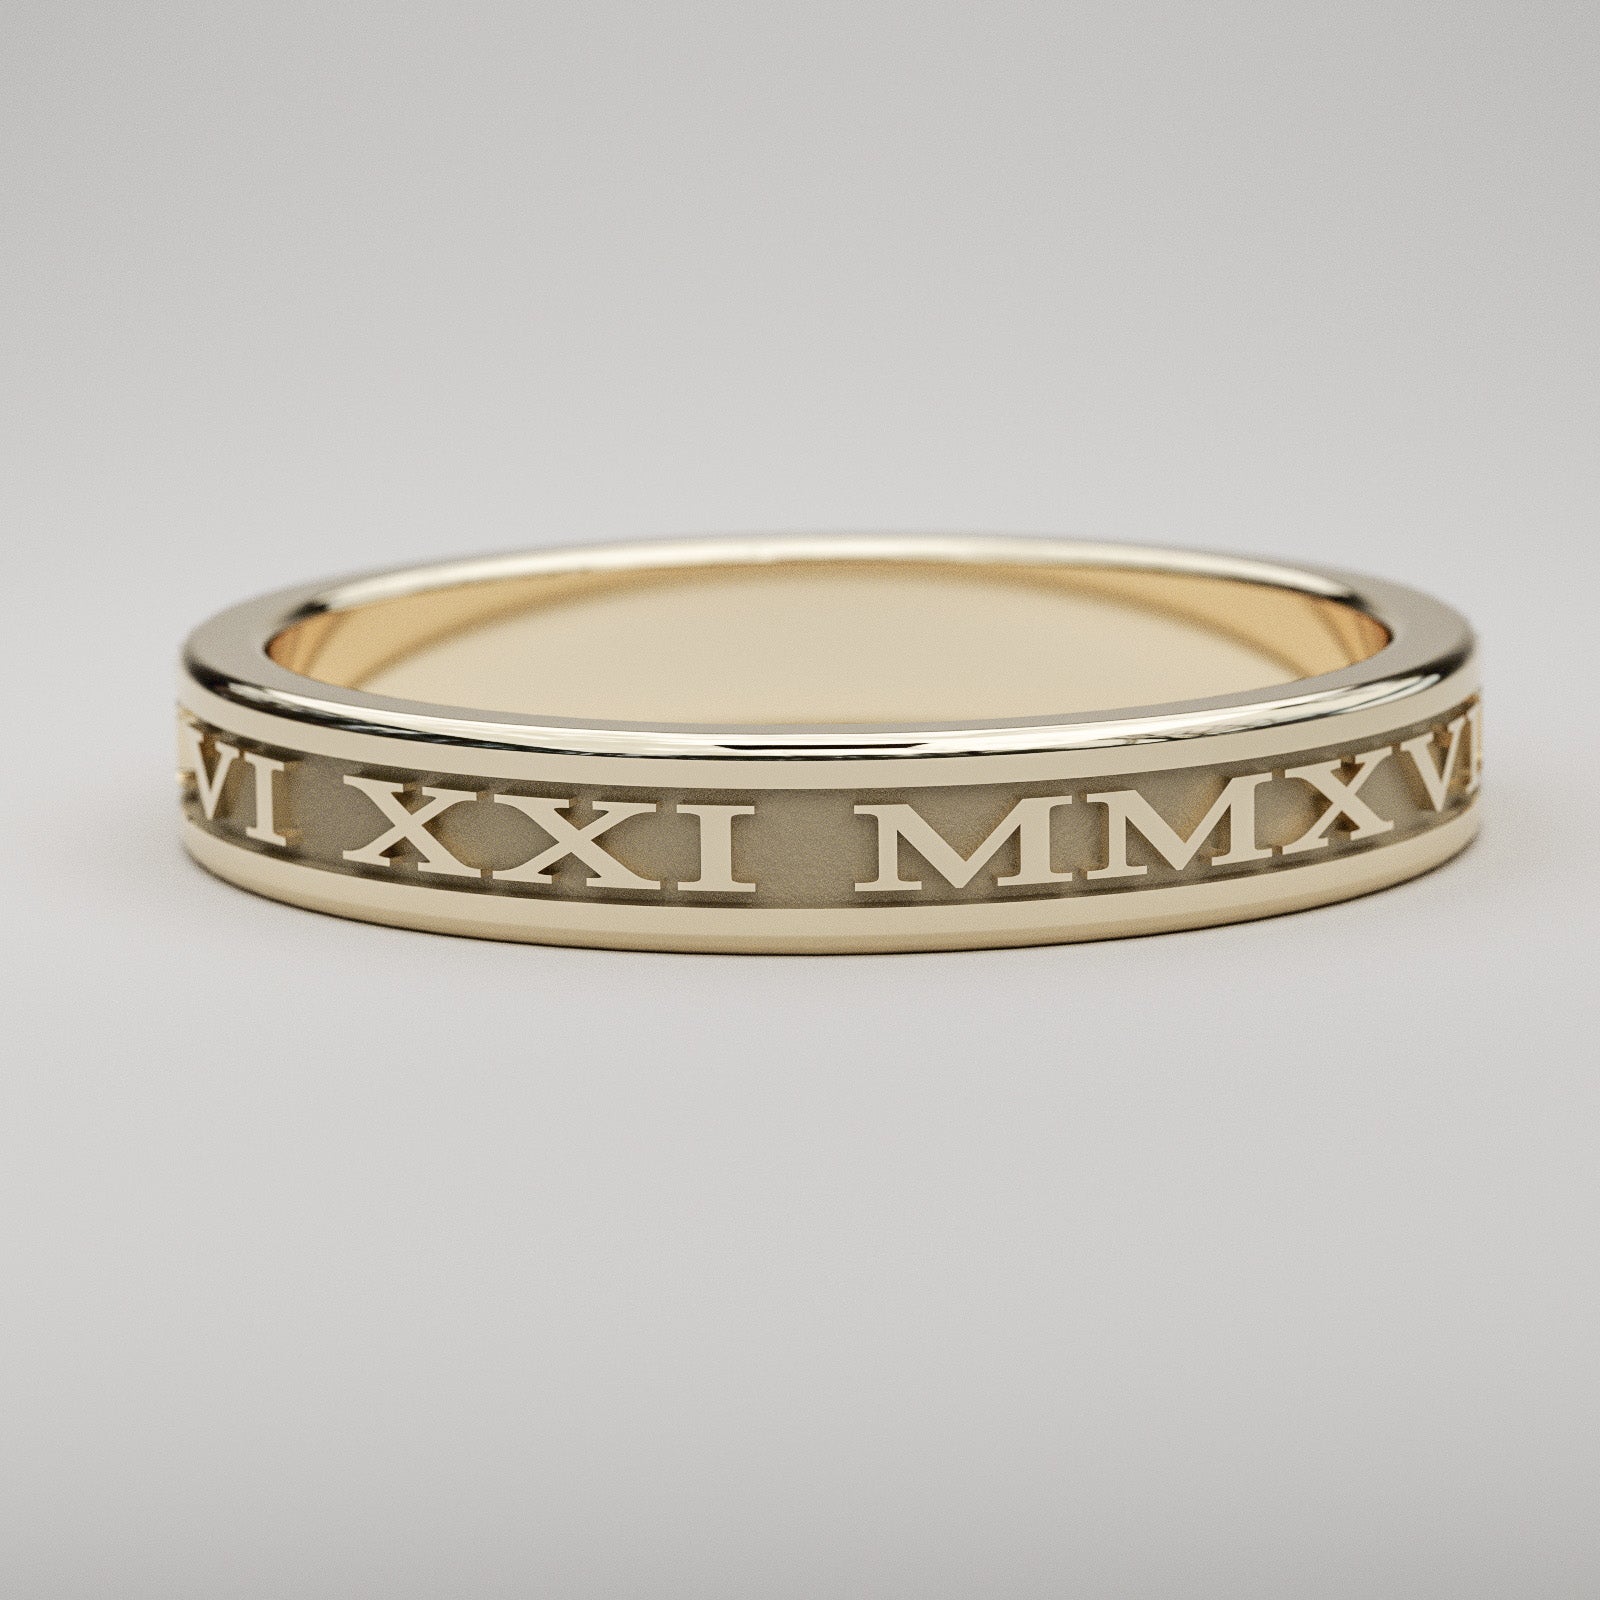 Custom date Roman Numeral ring in solid yellow gold, 3mm wide